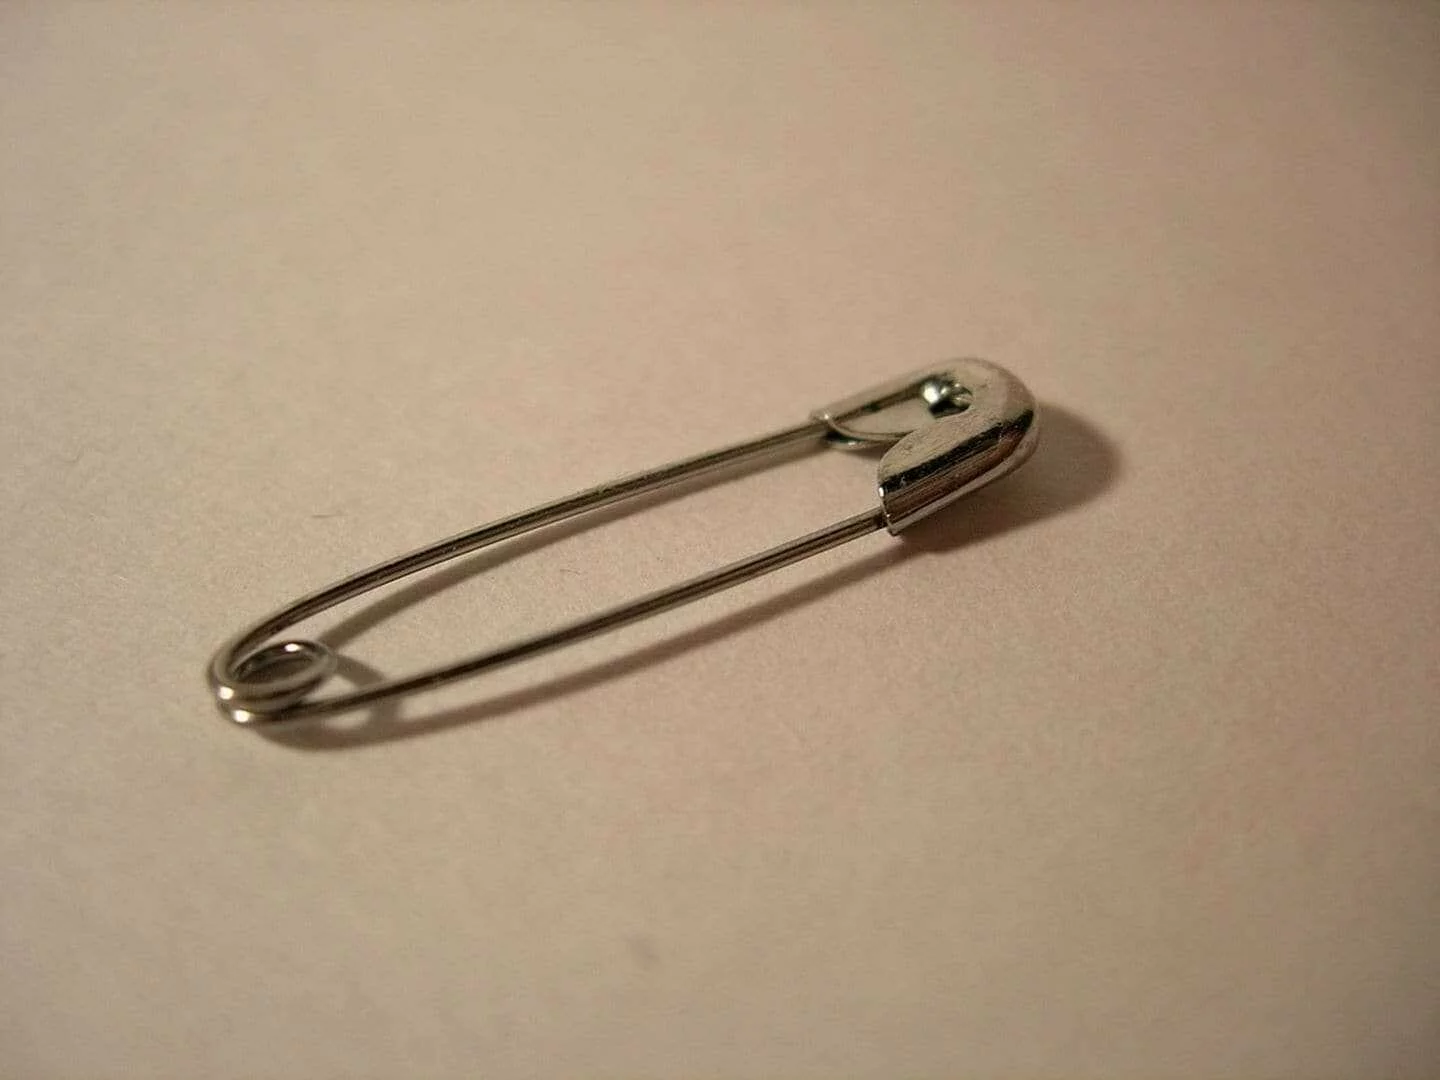 Go ahead, wear a safety pin. But don’t expect people of color to care.